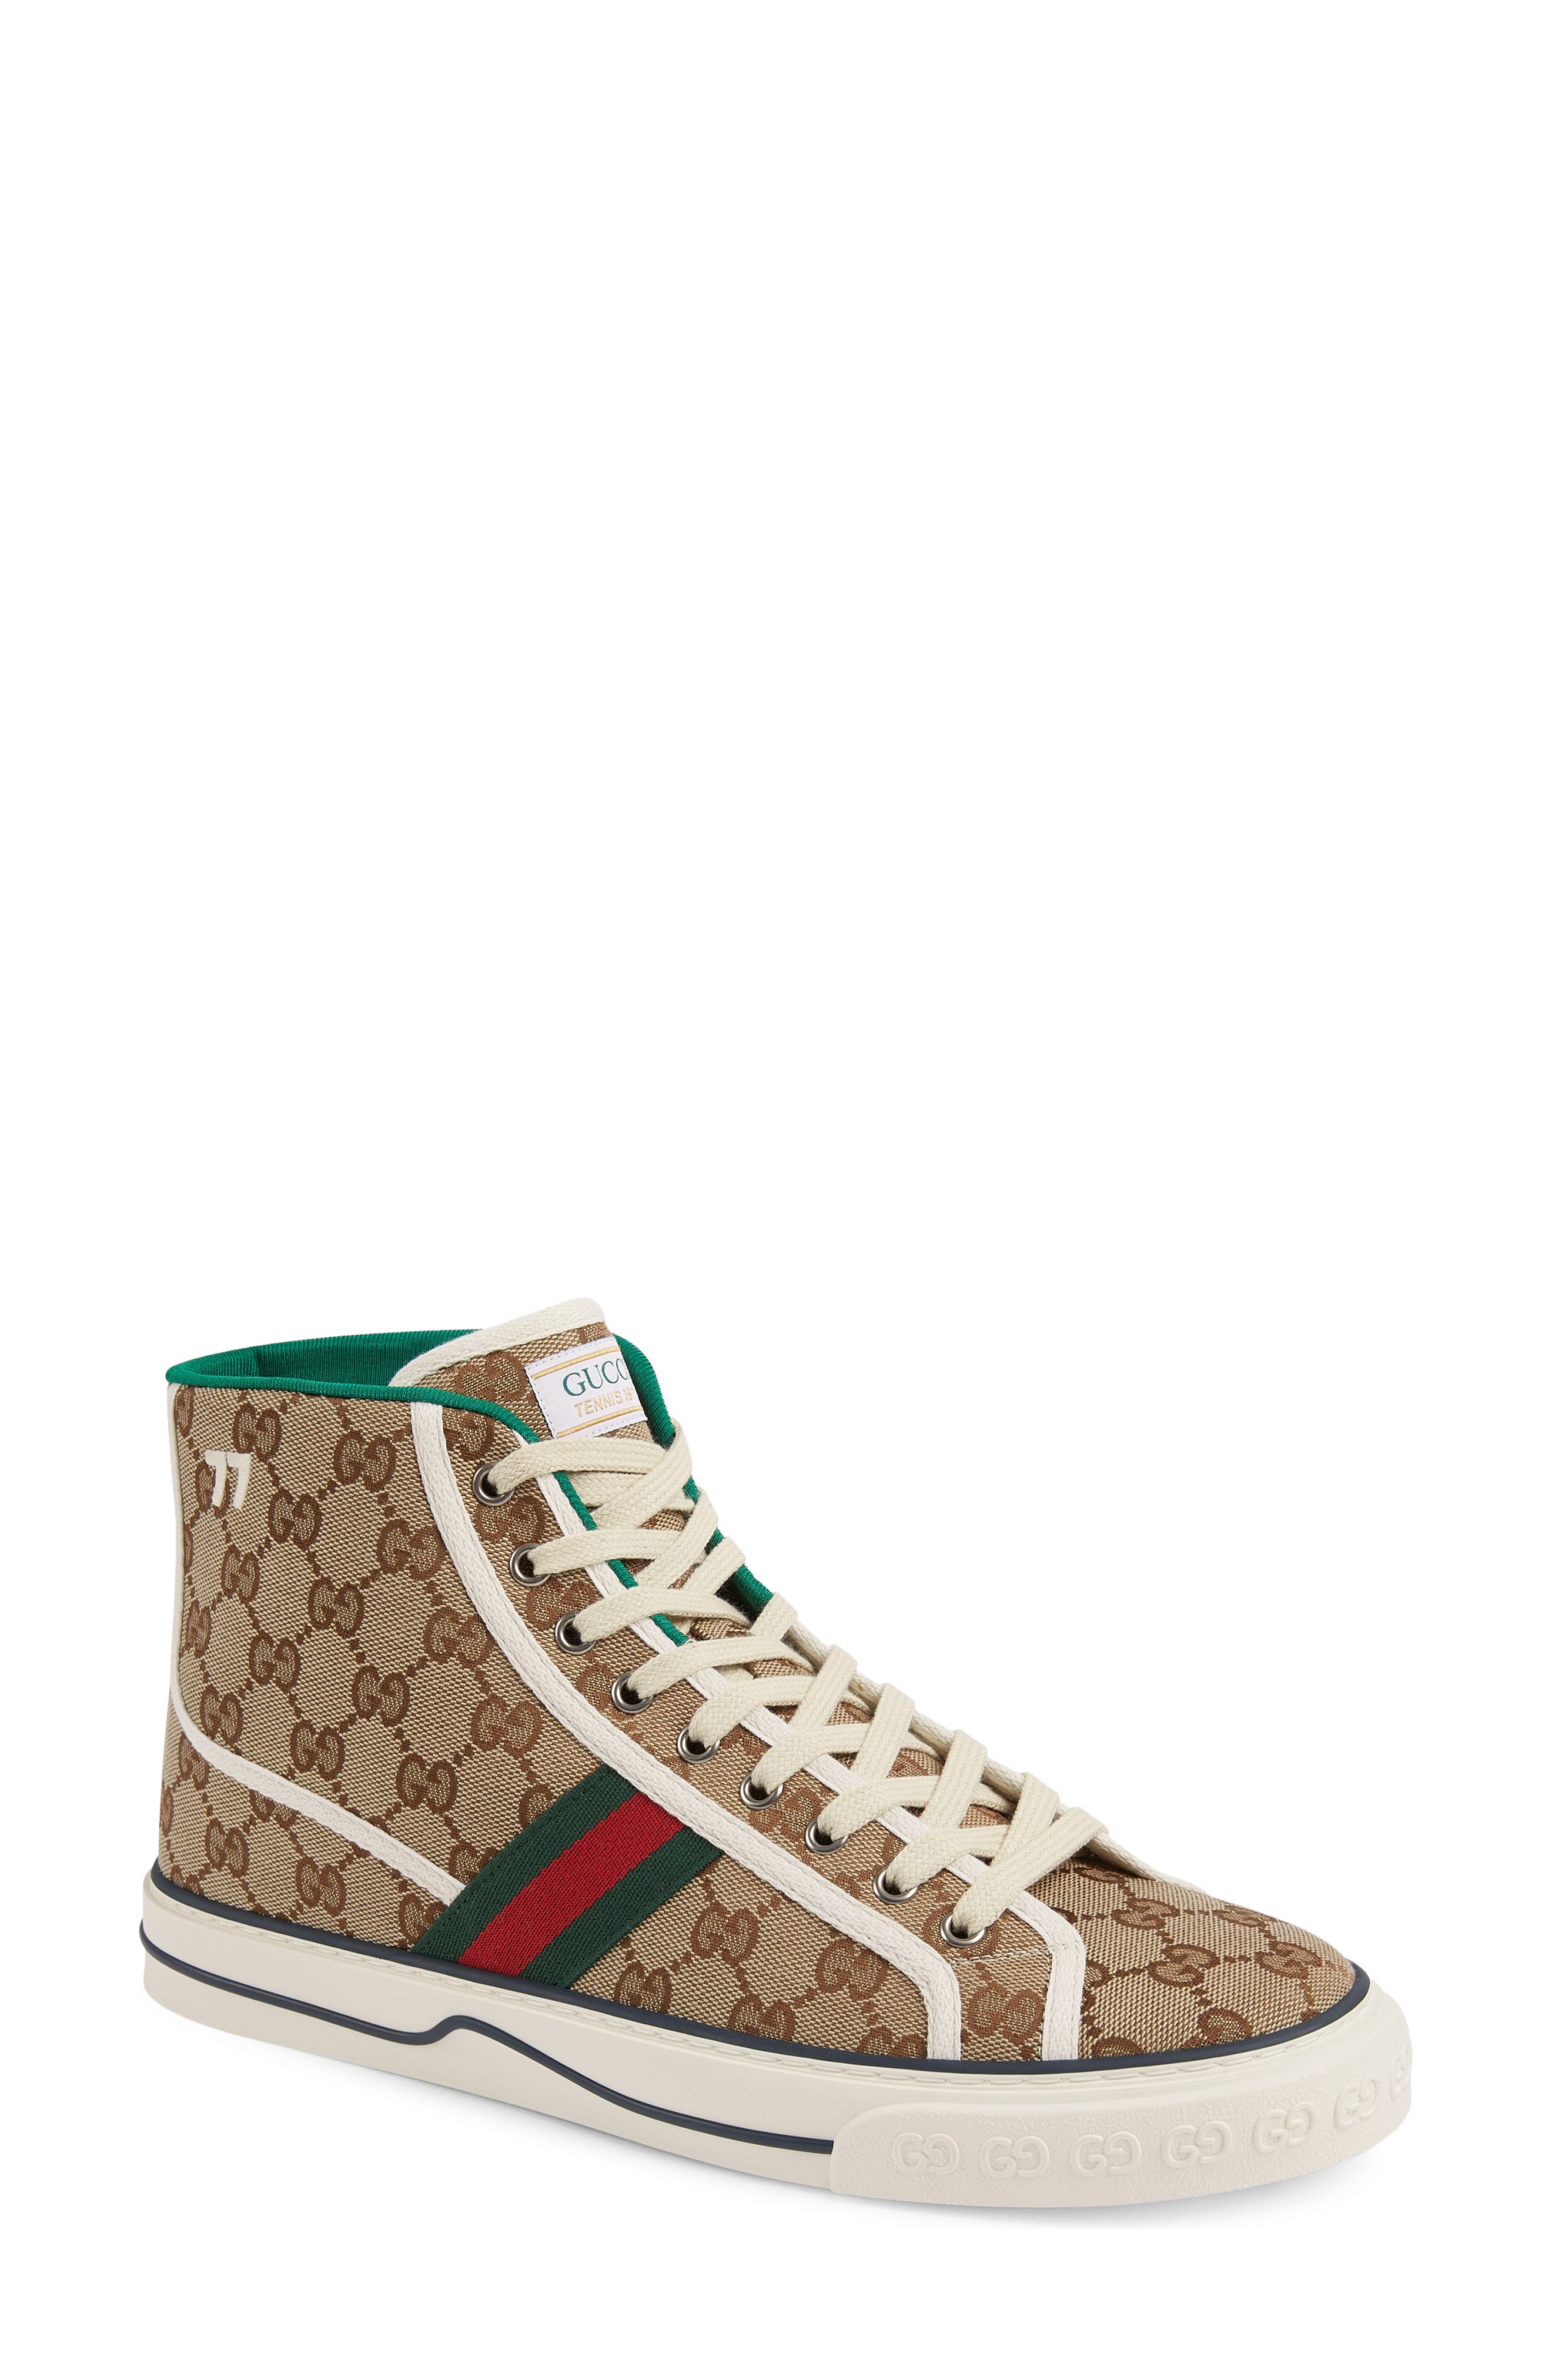 Gucci Tennis 1977 High Top Sneaker in Beige/White at Nordstrom, Size 13Us